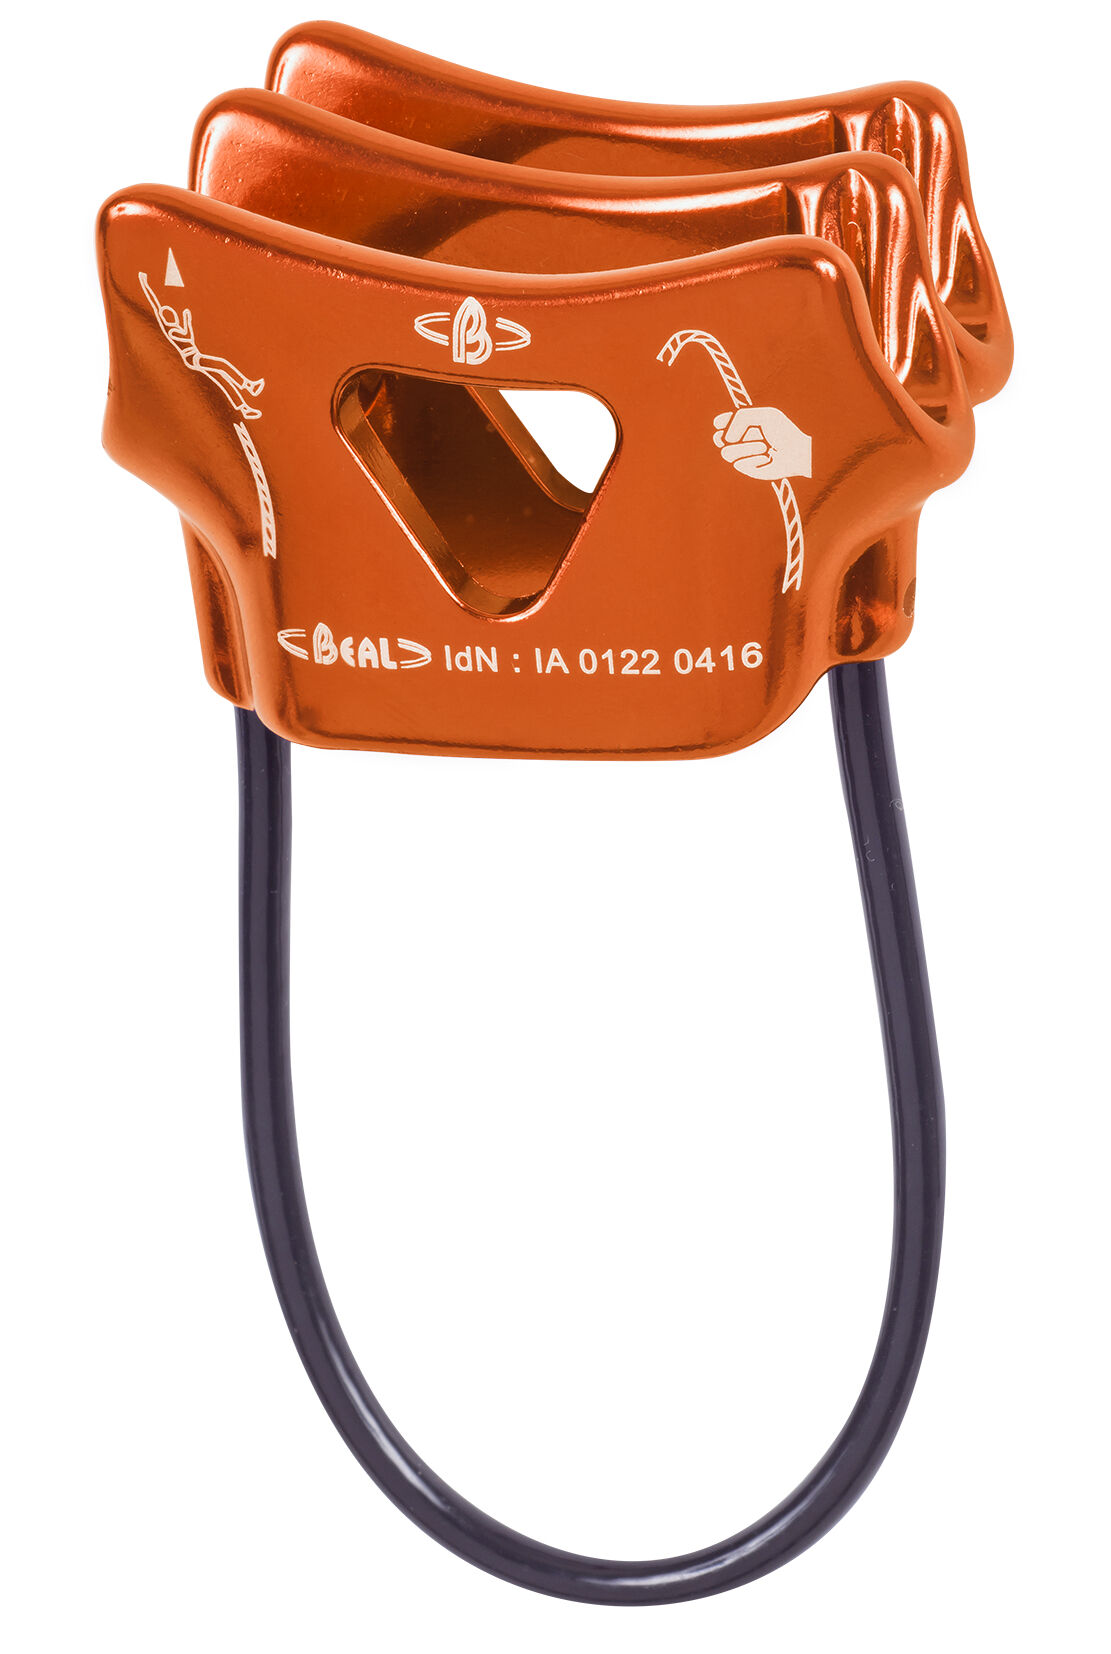 Beal - Air Force 2 - Belay device